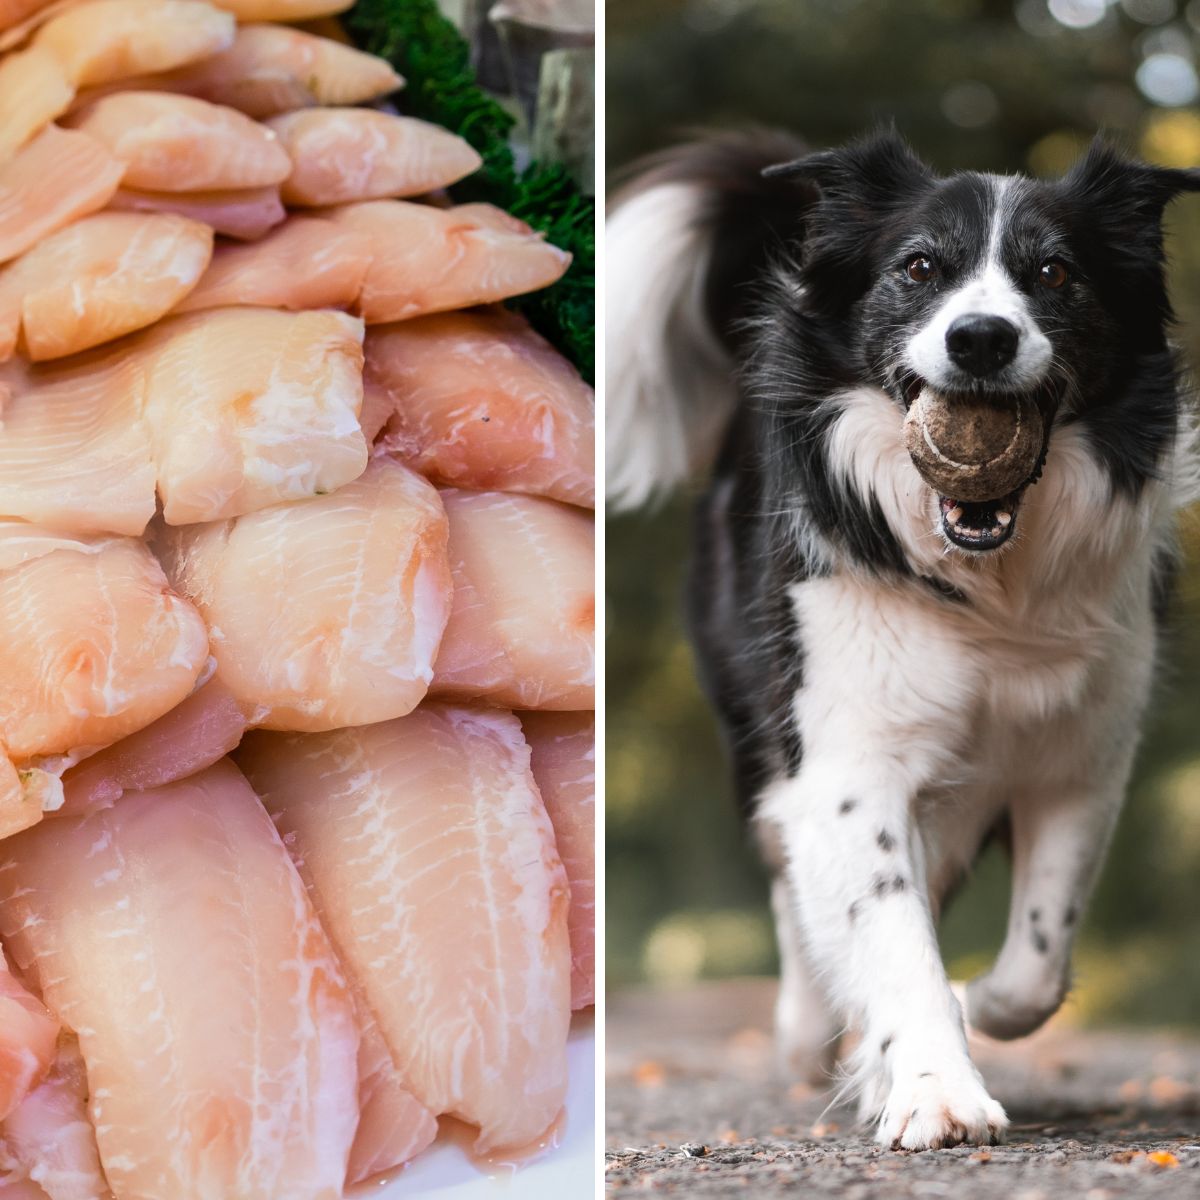 Can Dogs Eat Tilapia?